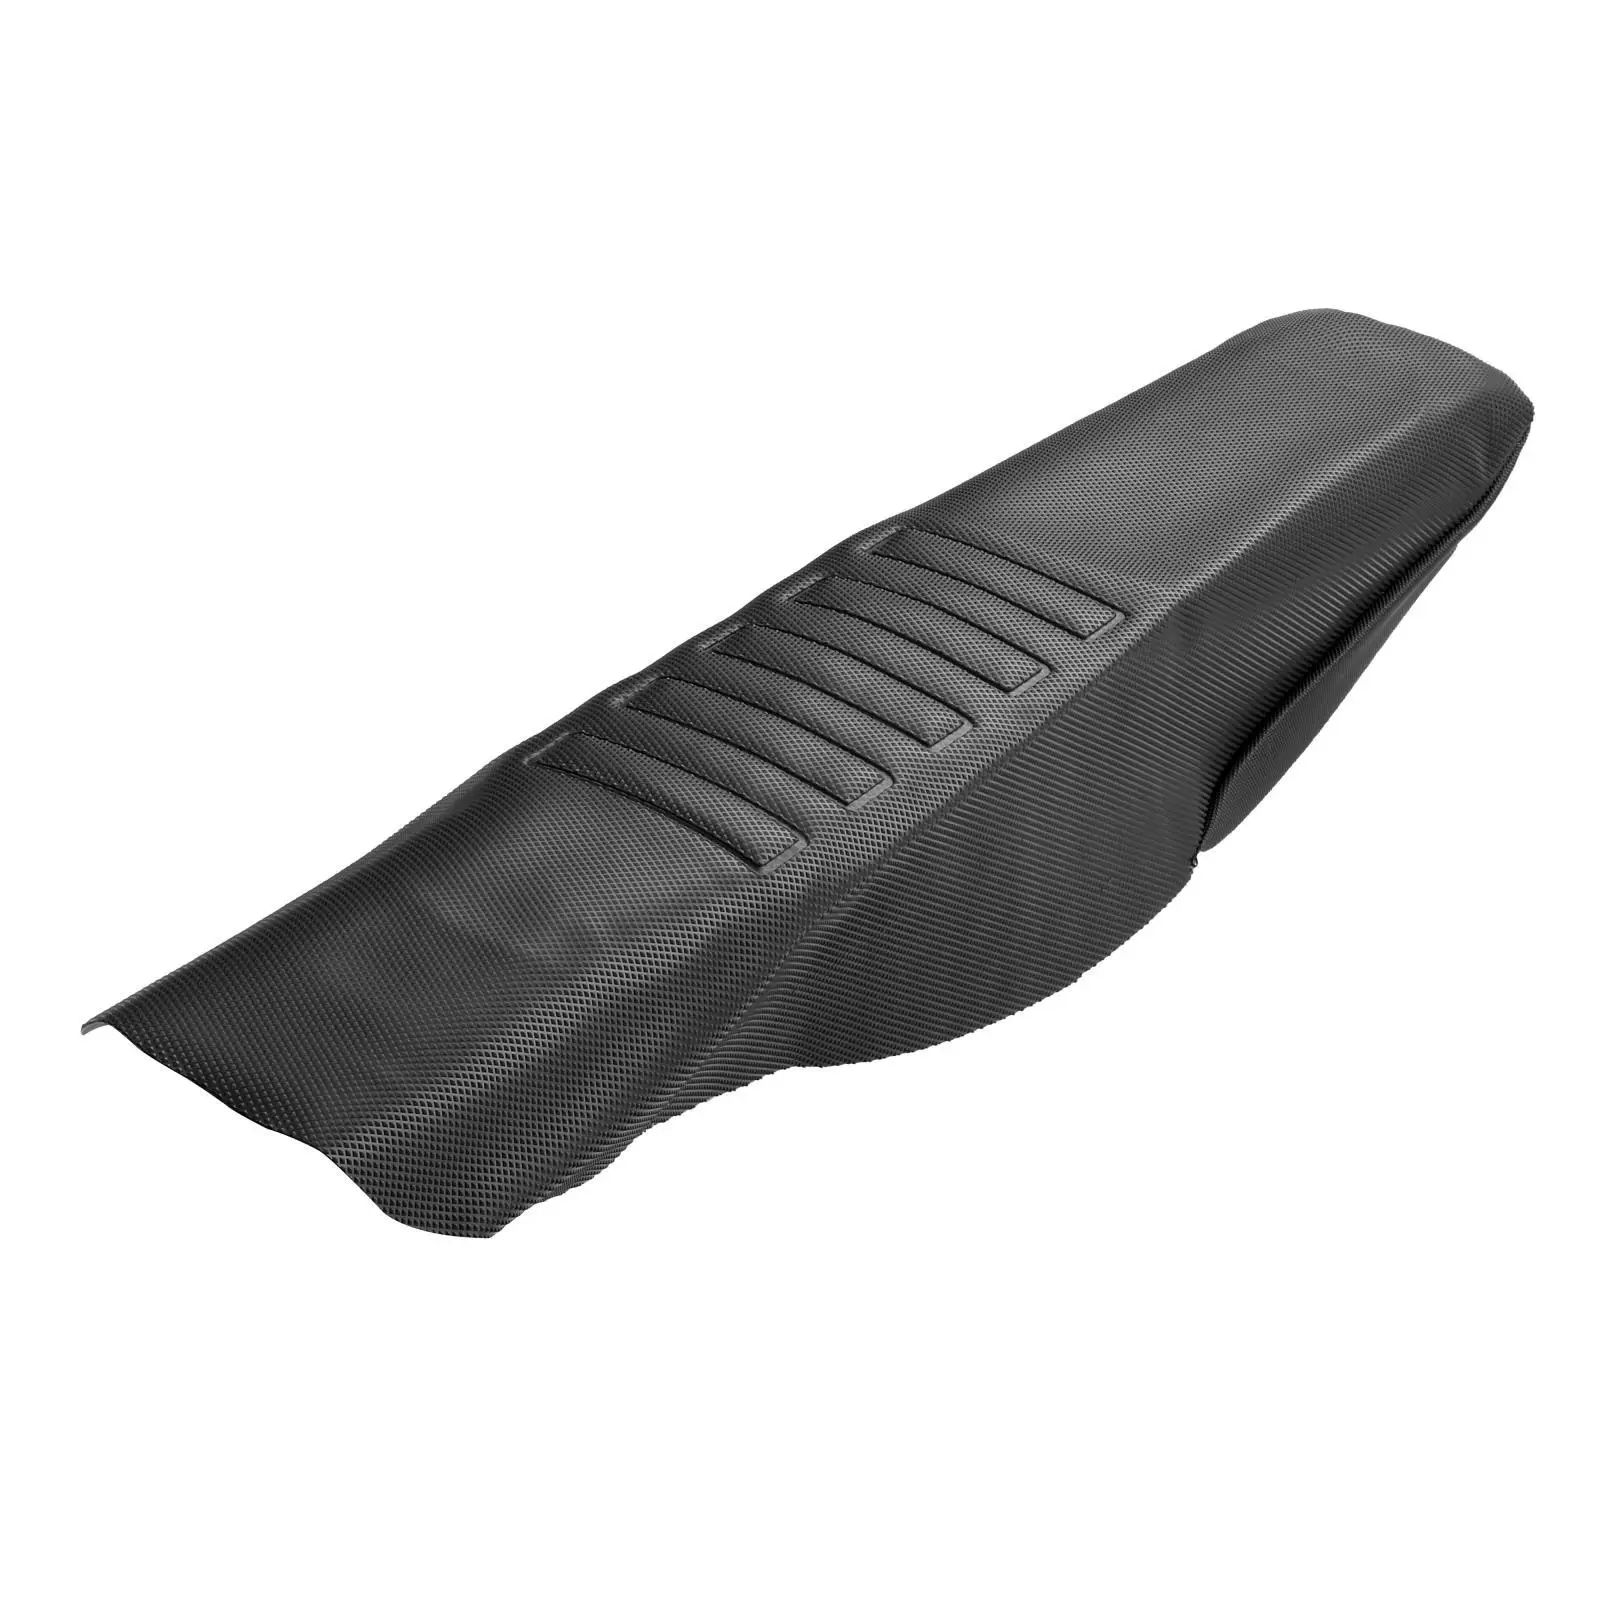 Soft Seat Pad Thick Particles Waterproof Decoration Accessories Non-Slip EVA Material Lightweight Fit for Crf Kxf Yzf